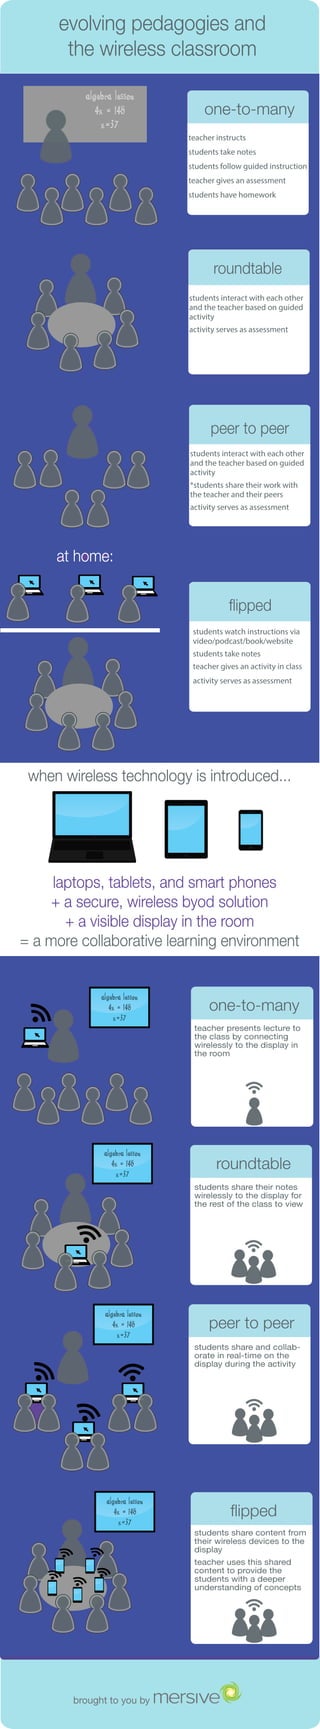 Evolving Pedagogies and the Wireless Classroom